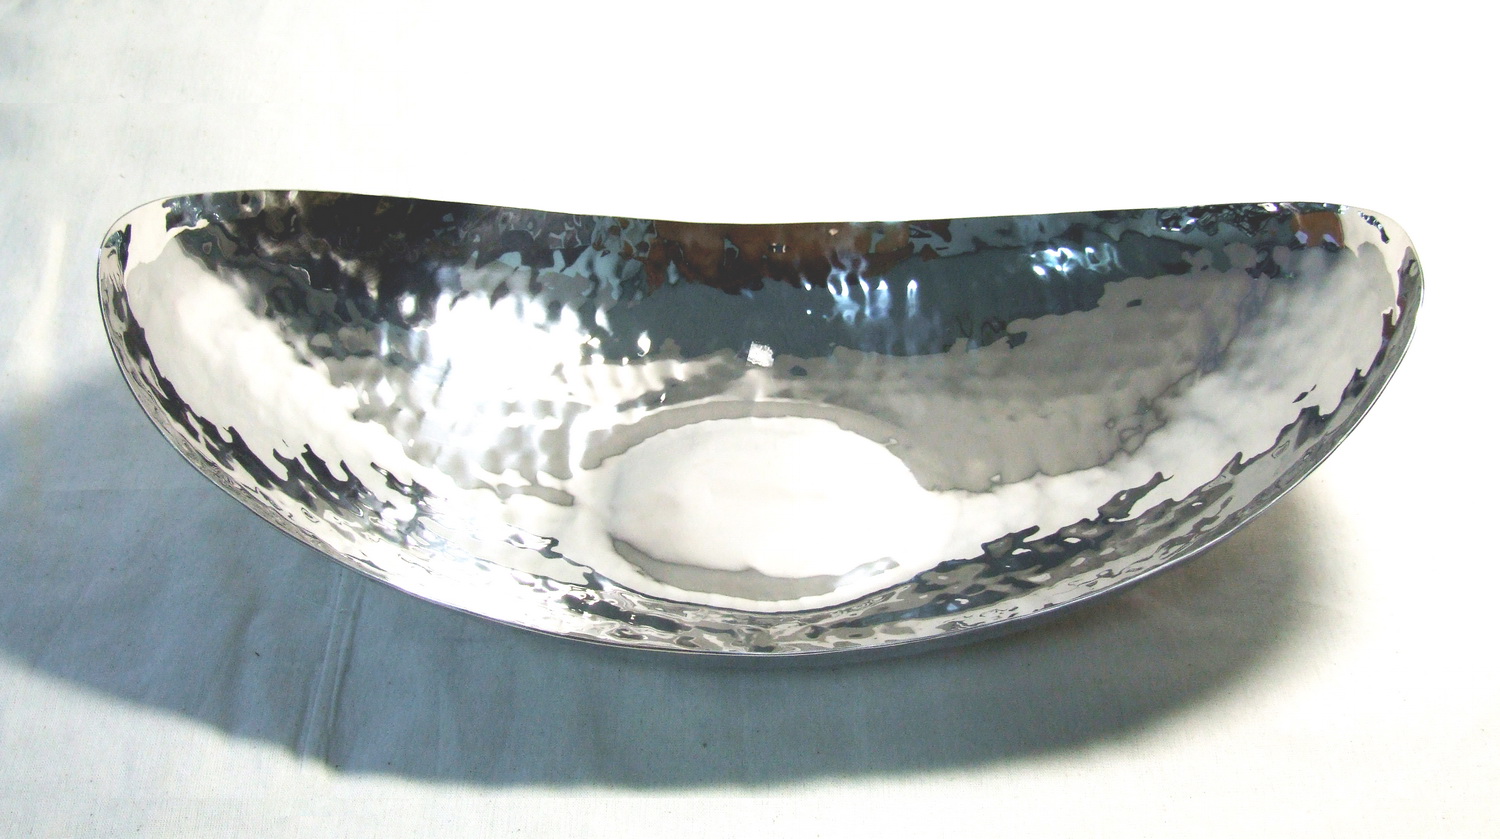 Stainless Steel Oval Bowl